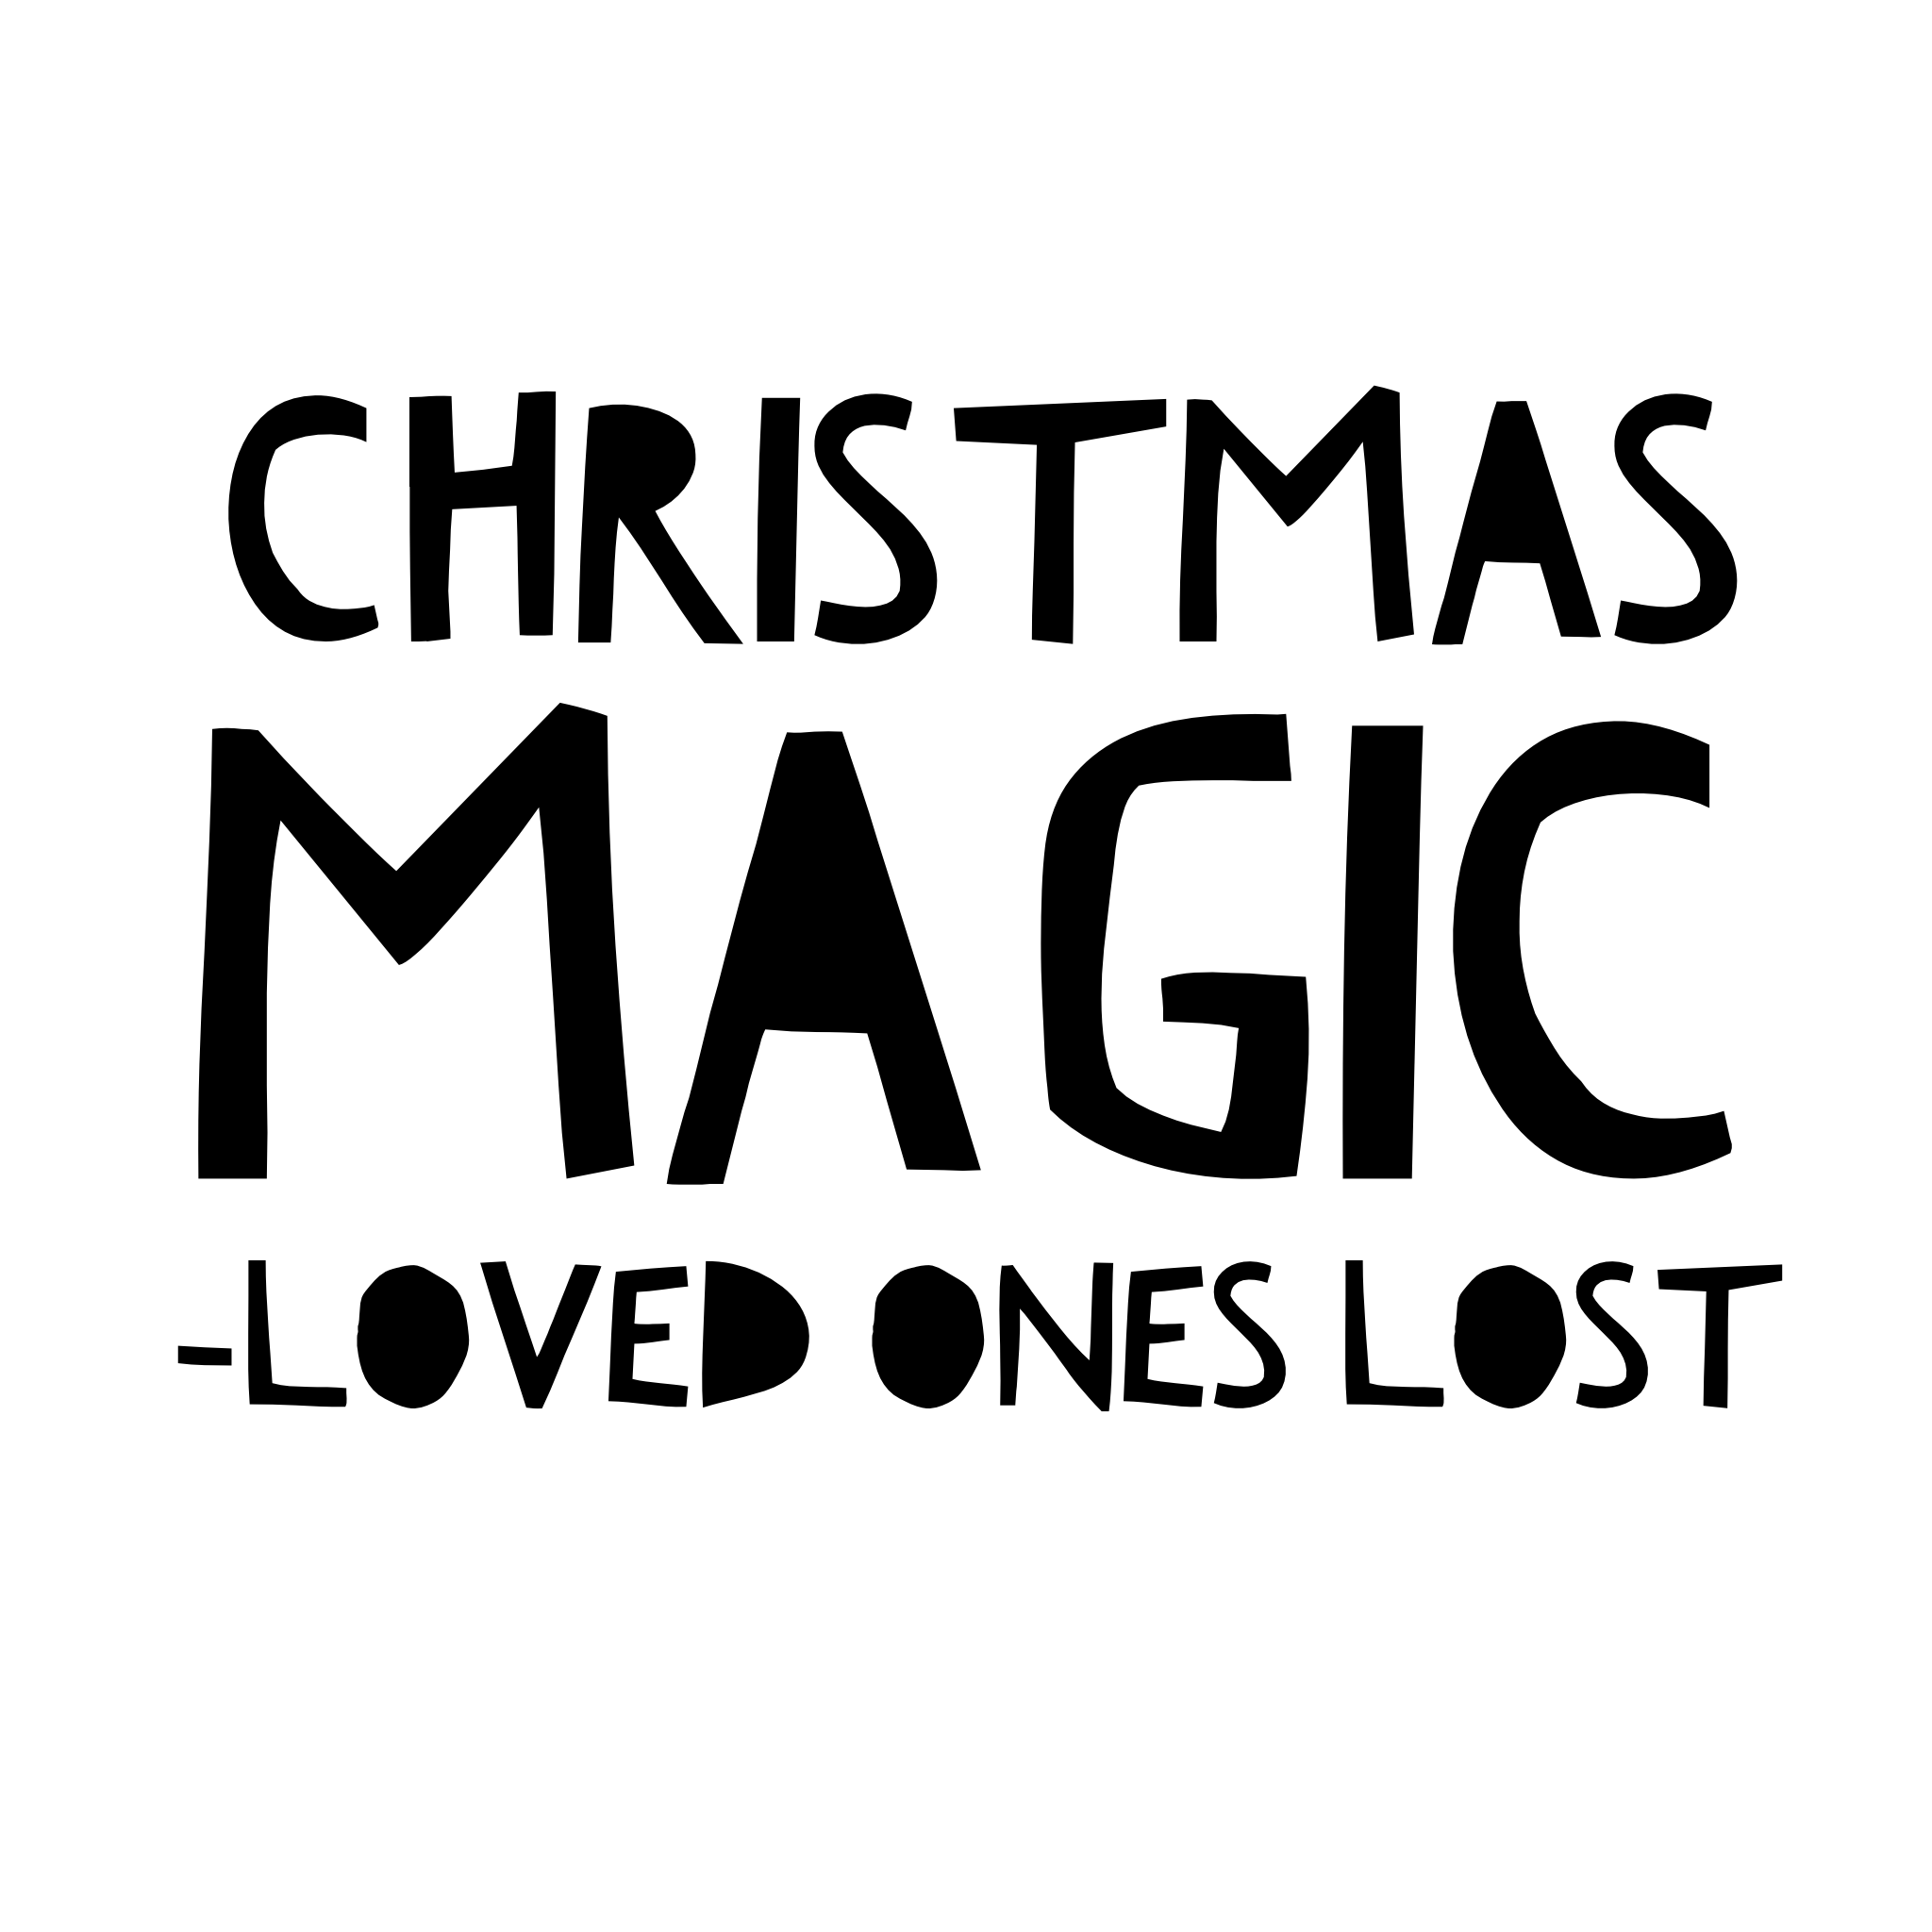 CHRISTMAS MAGIC - LOVED ONES LOST